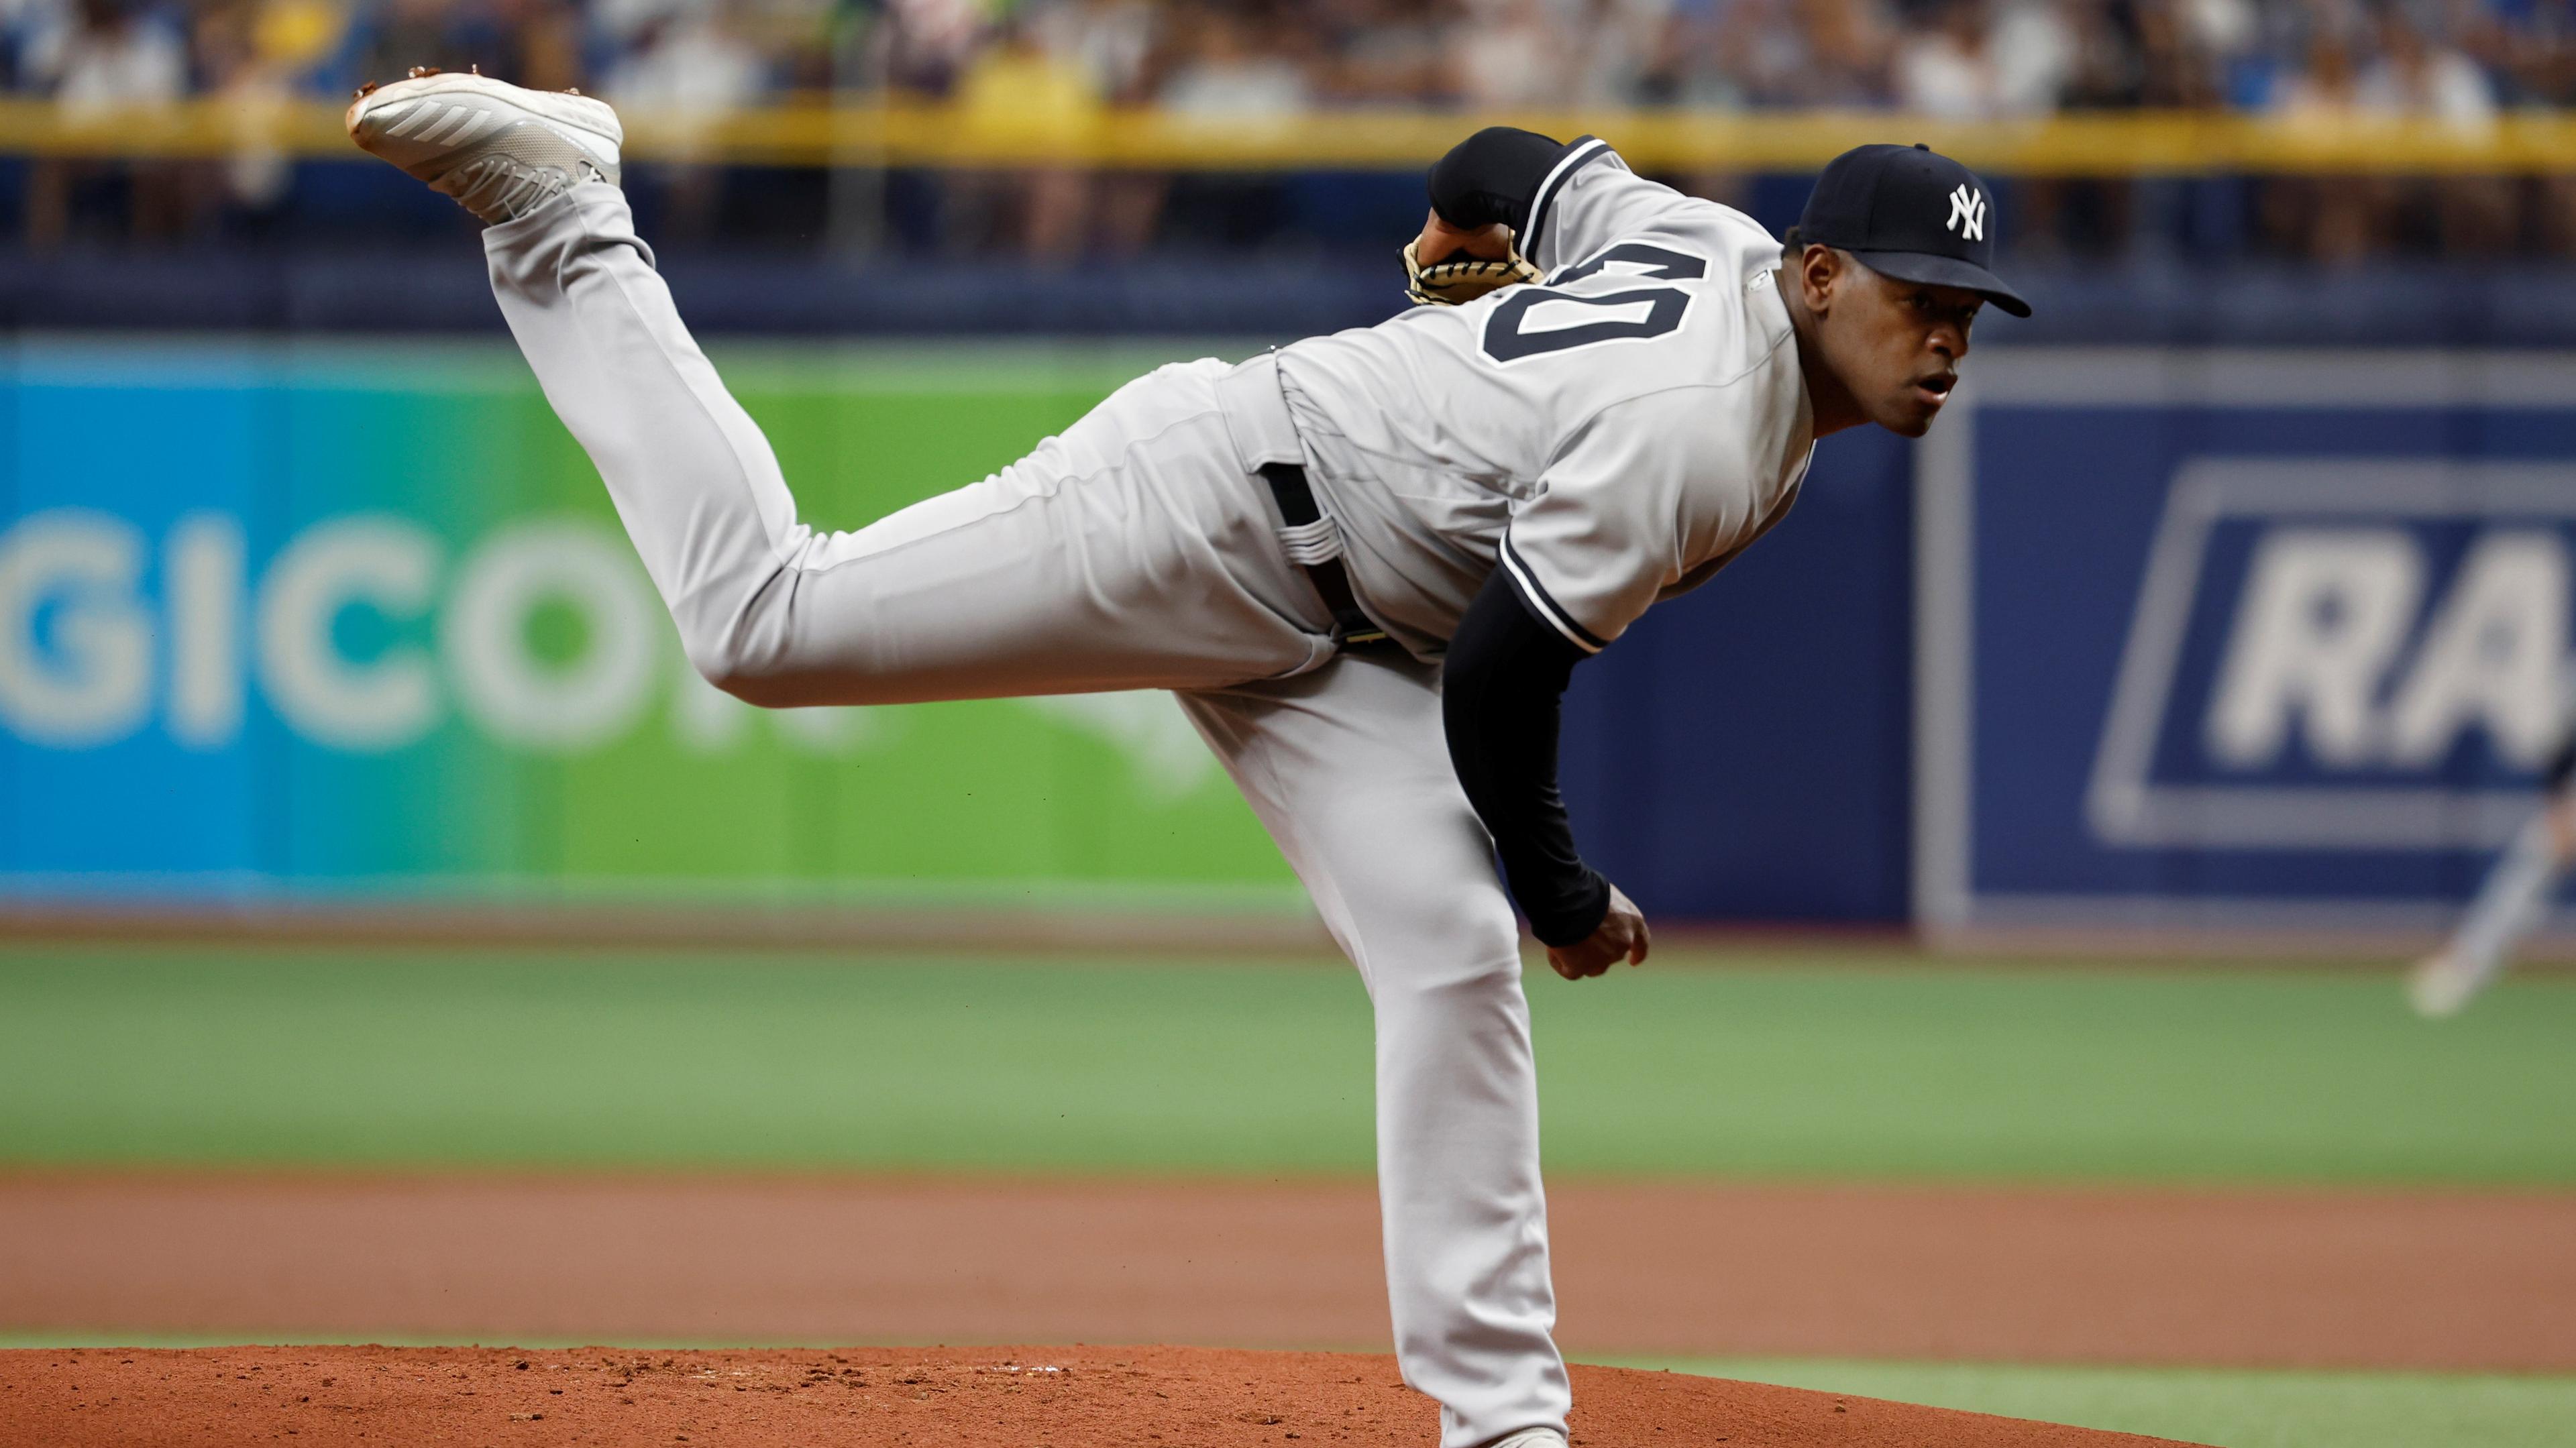 New York Yankees starting pitcher Luis Severino (40) throws a pitch during the first inning against the Tampa Bay Rays at Tropicana Field. / Kim Klement-USA TODAY Sports